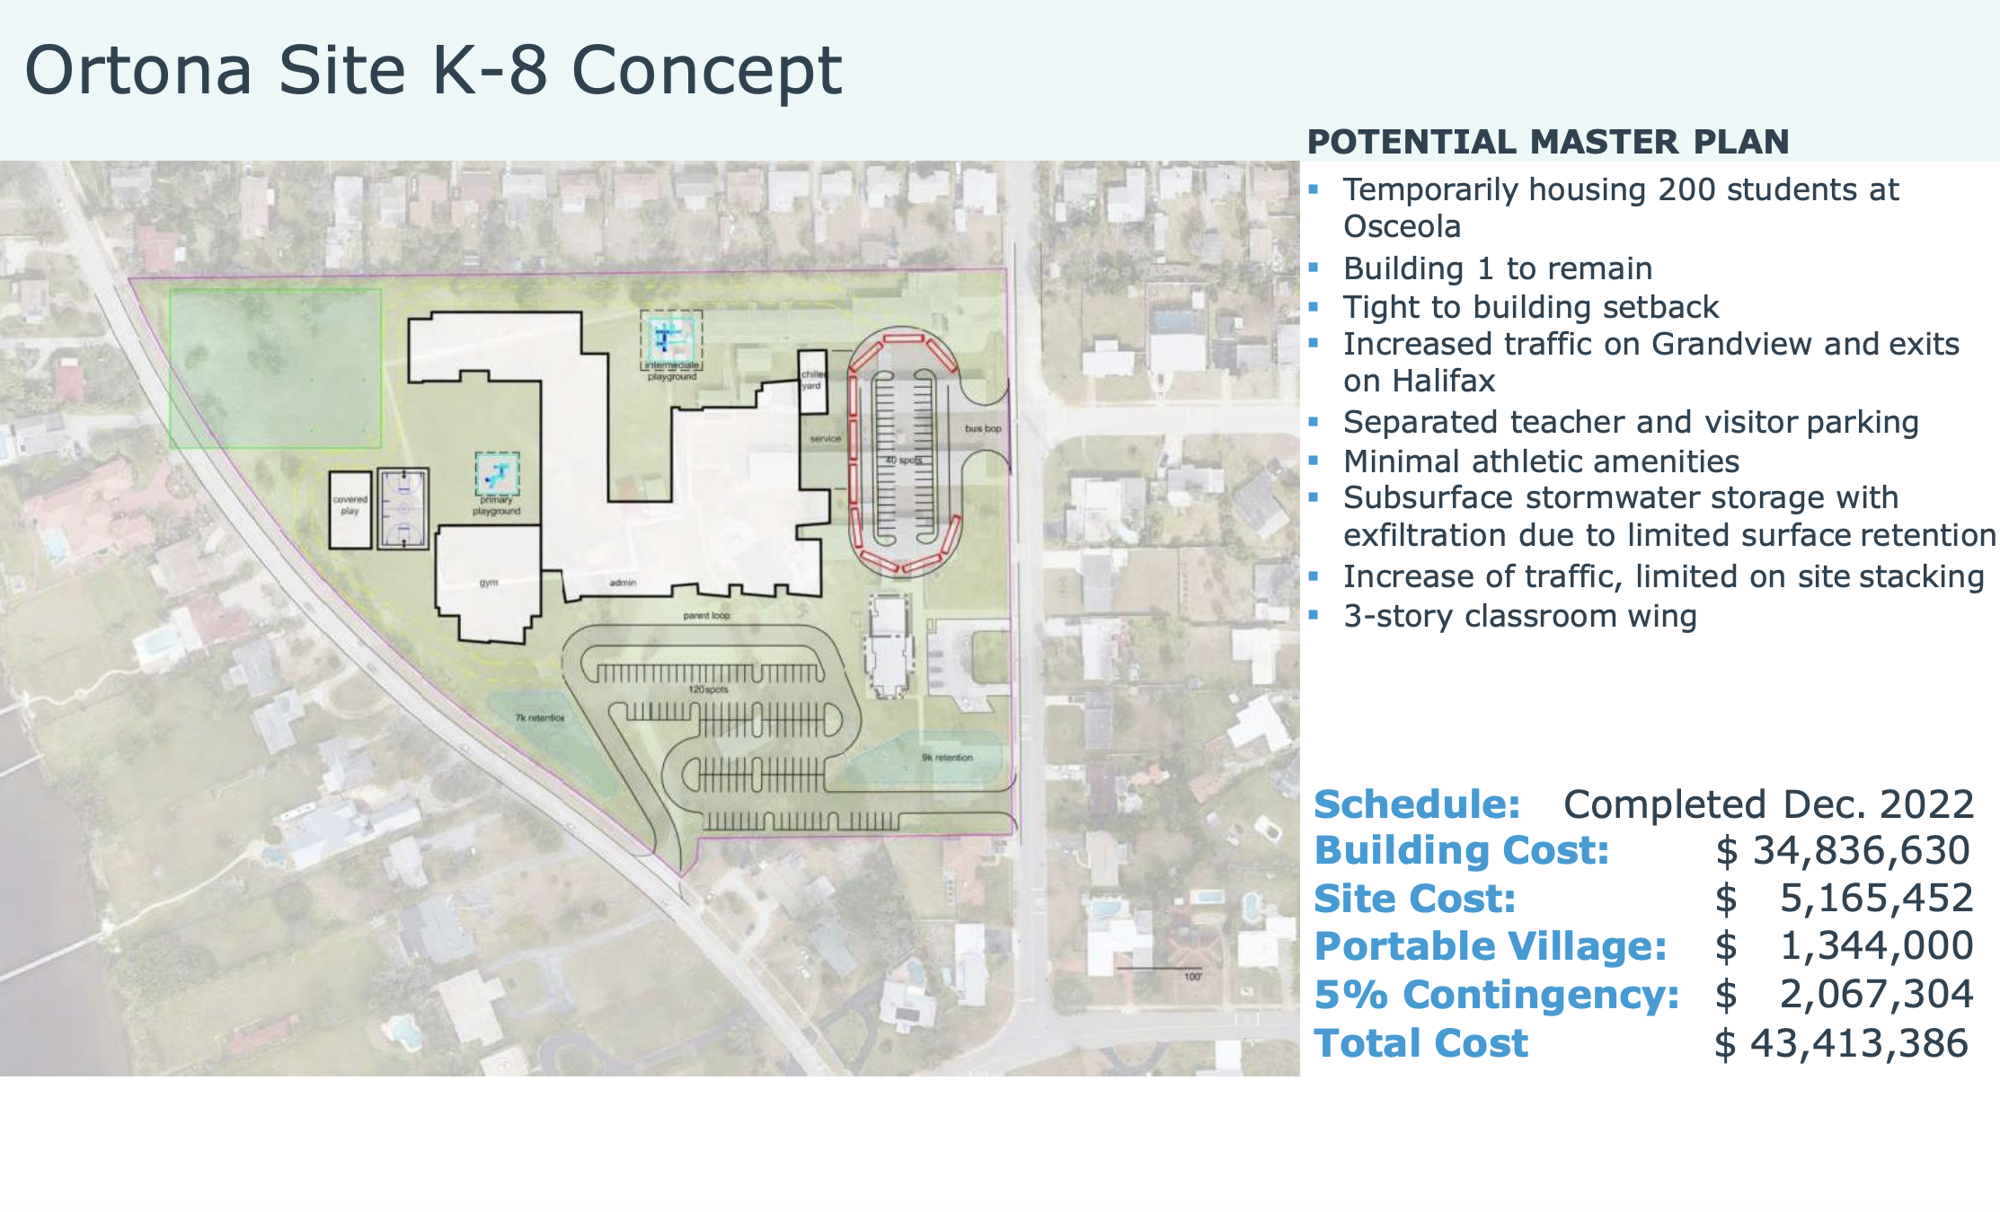 The concept plans by BRPH for a K-8 at Ortona Elementary, located at 1265 N. Grandview Ave. Courtesy of Volusia County Schools